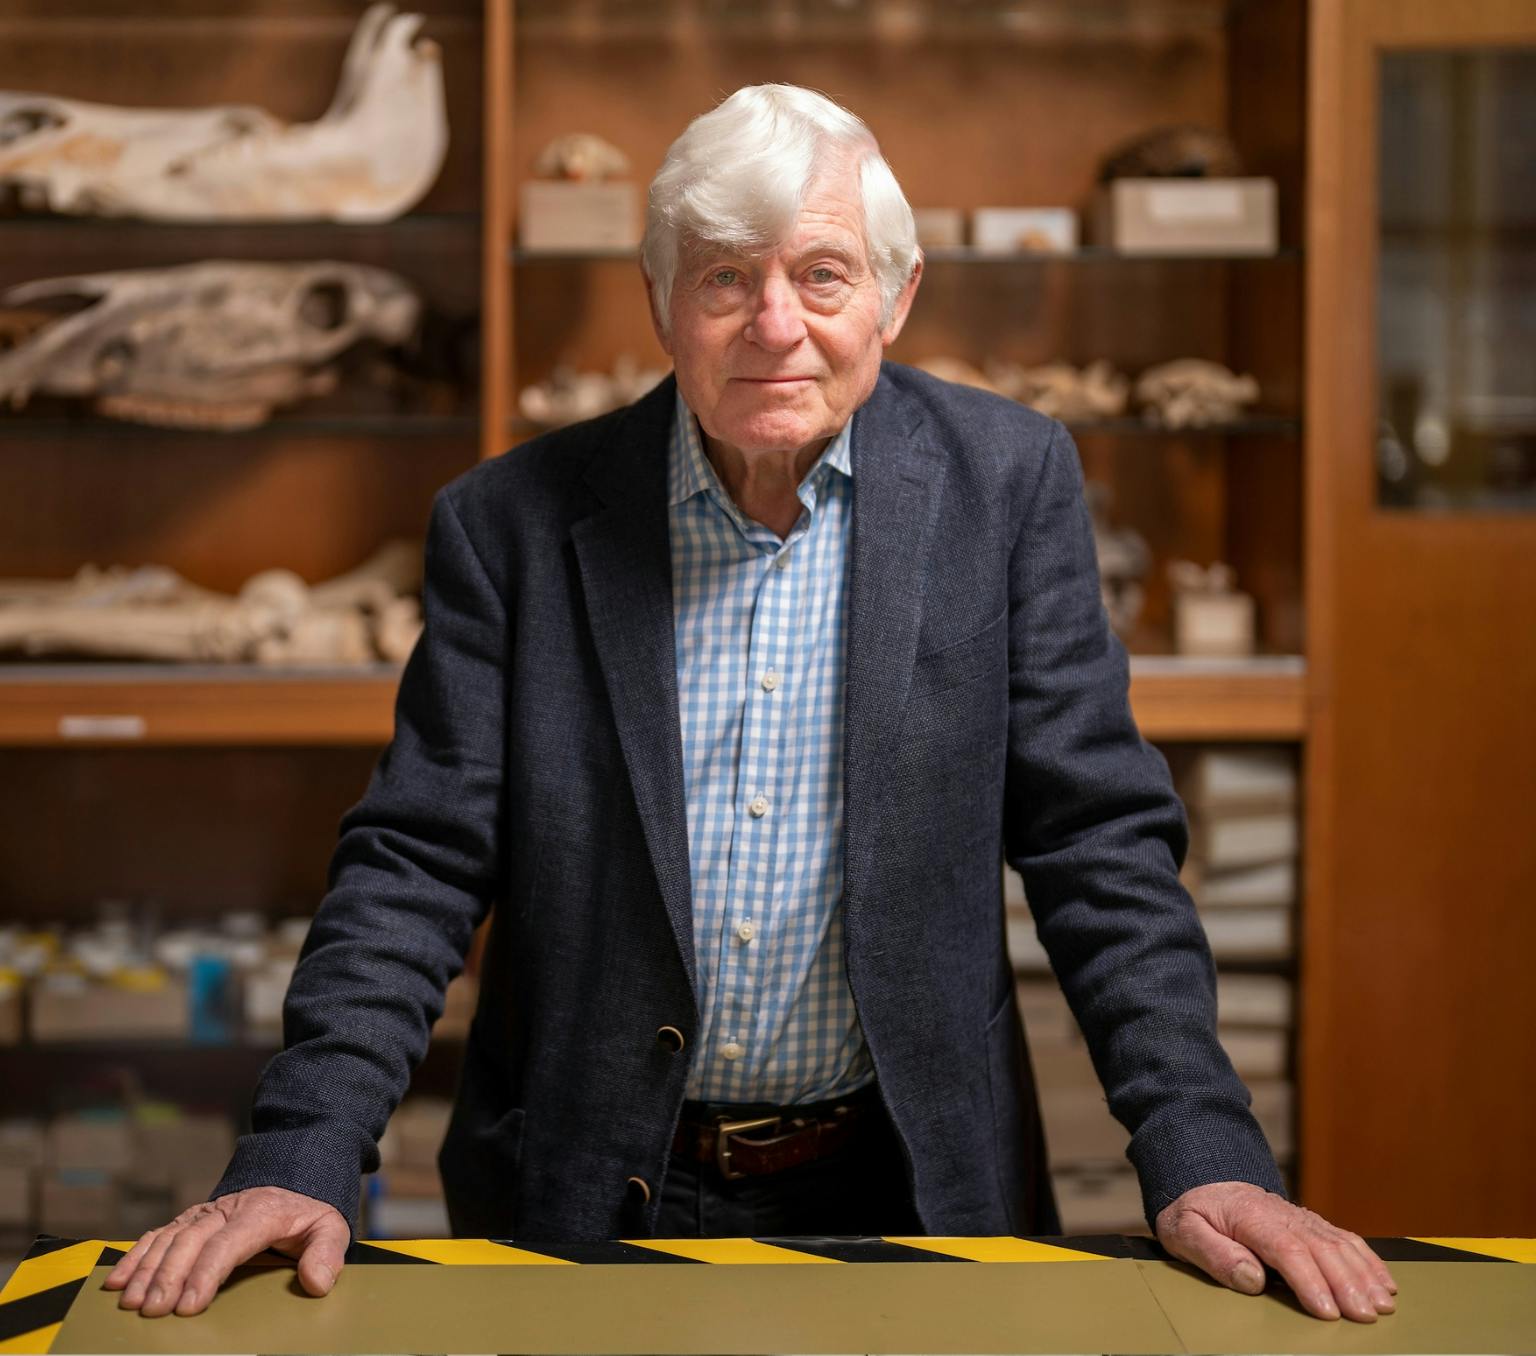 Peter is standing in front of a shelf with animal skulls and other artefacts. He has white short hair and s wearing a dark blue suit jacket